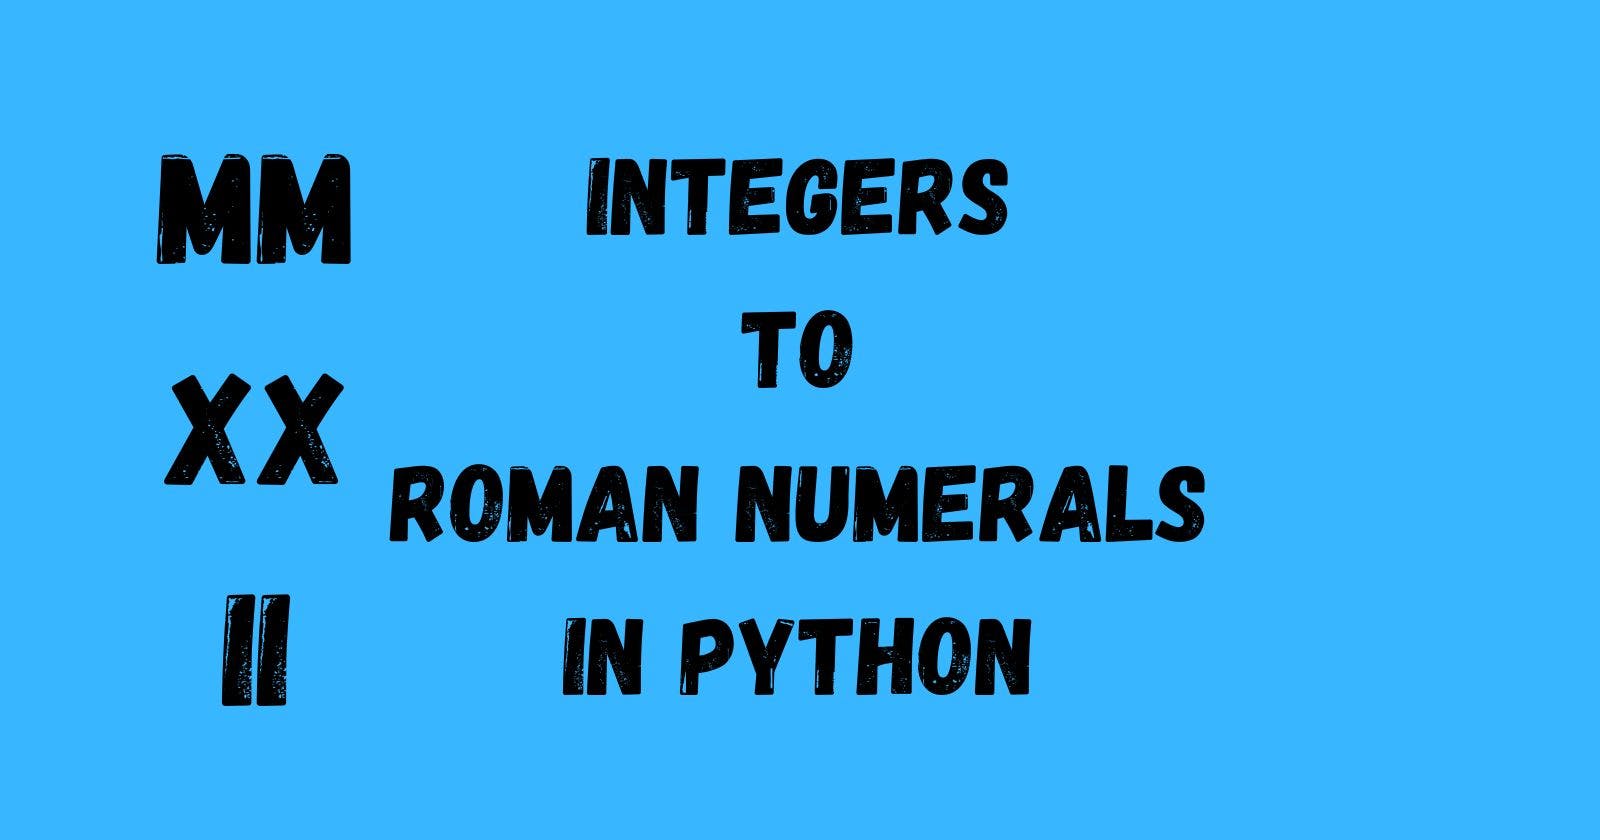 Converting Integers to Roman Numerals Using Python